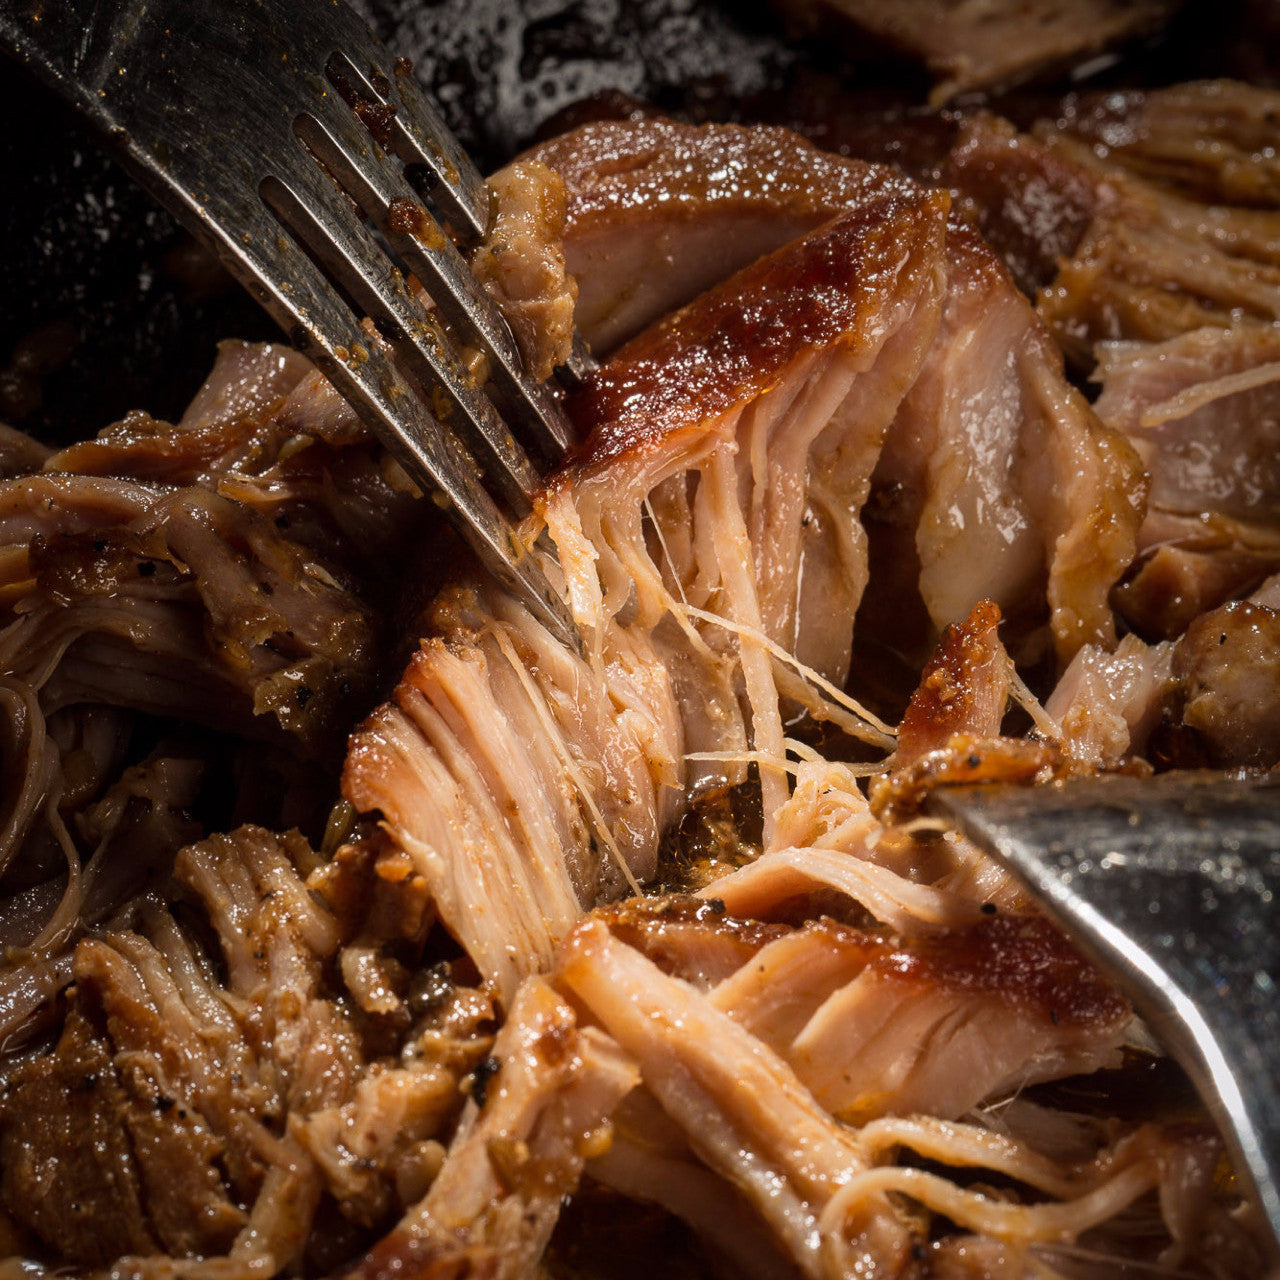 ready made home delivery meals featuring roast pork and fork, meals delivered to your door